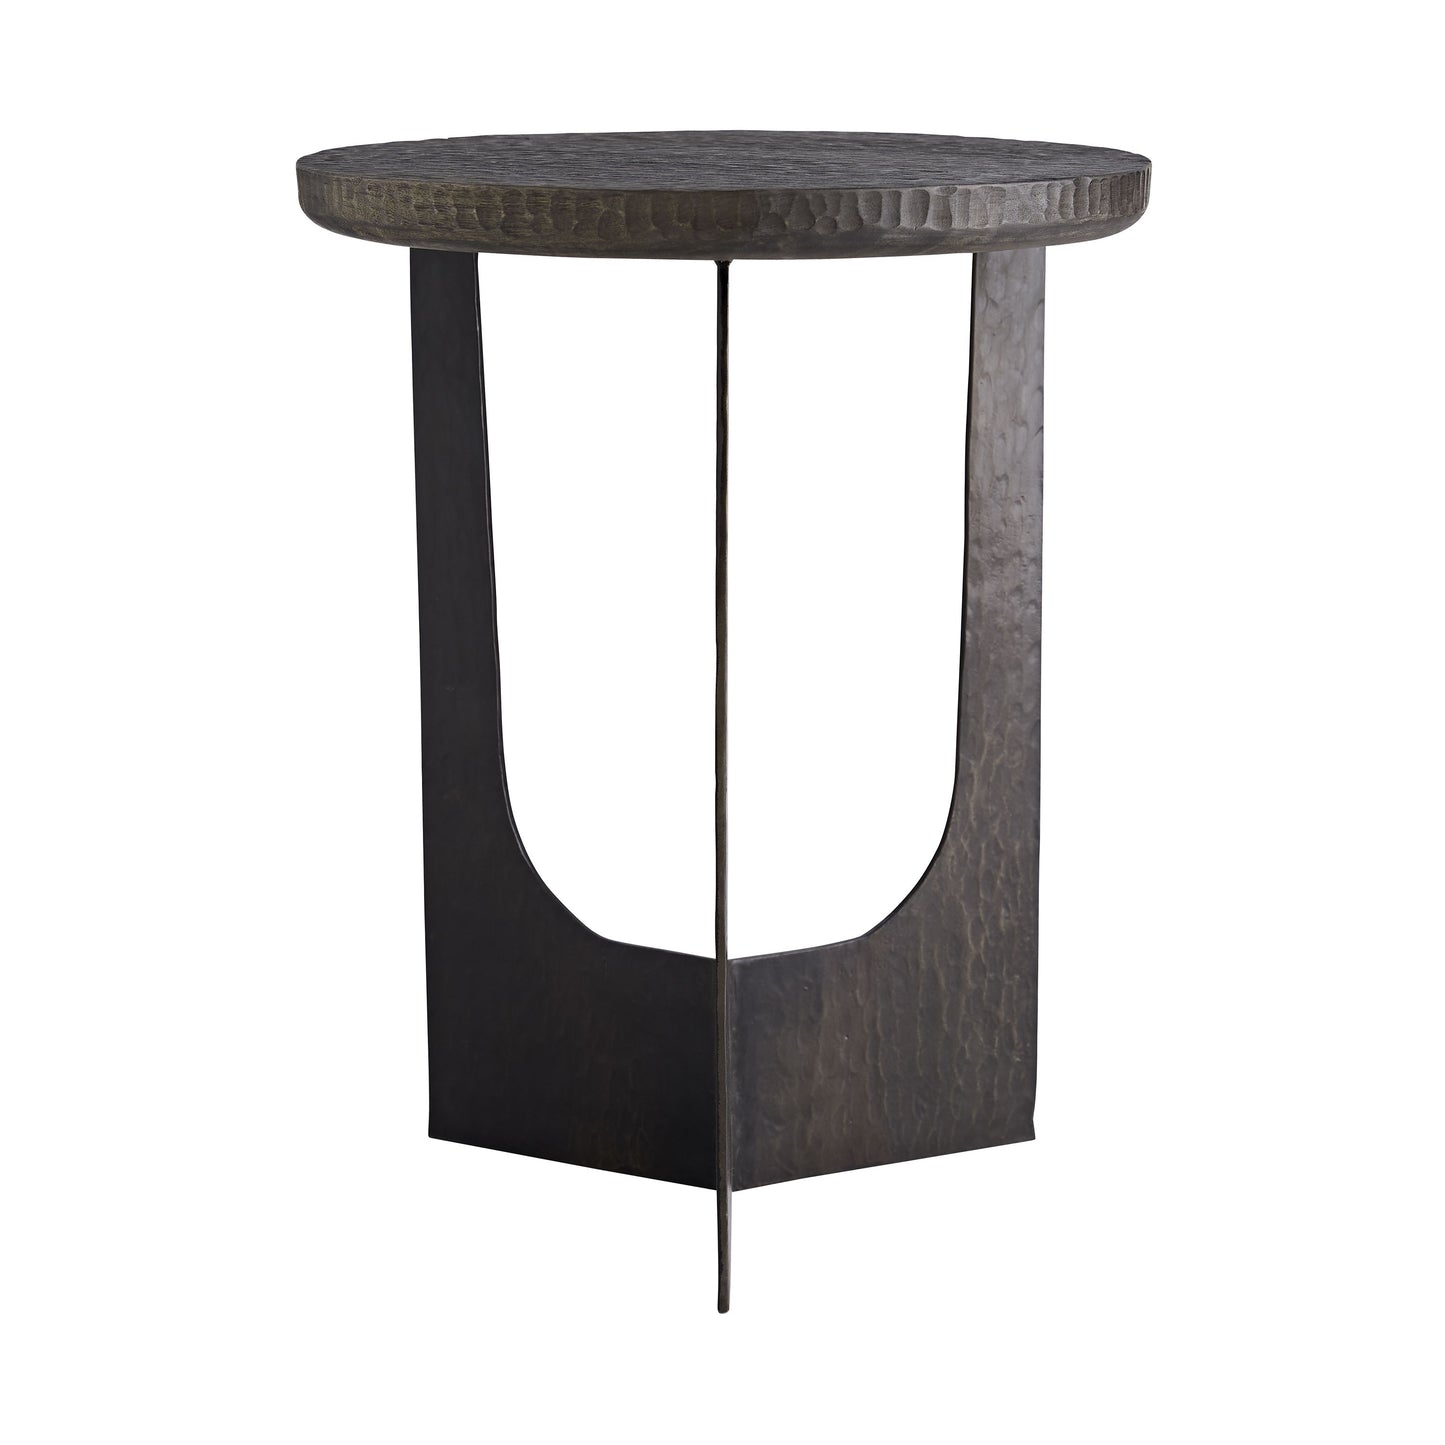 arteriors dustin accent table angle